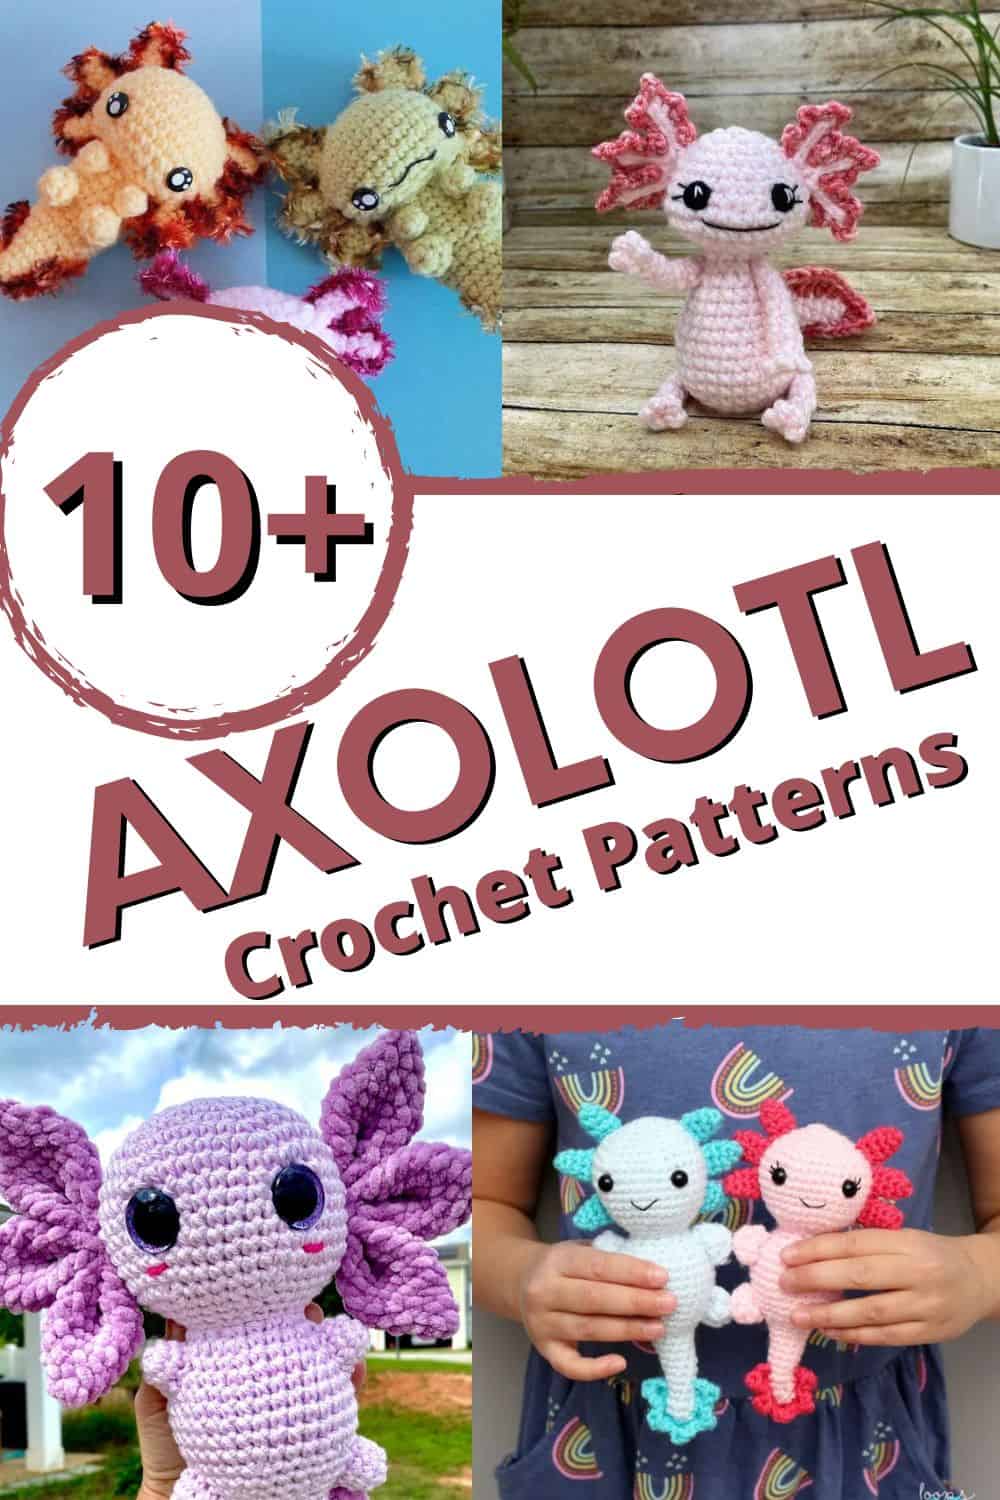 graphic reading "10+ axolotl crochet patterns" with collage of crochet axolotls